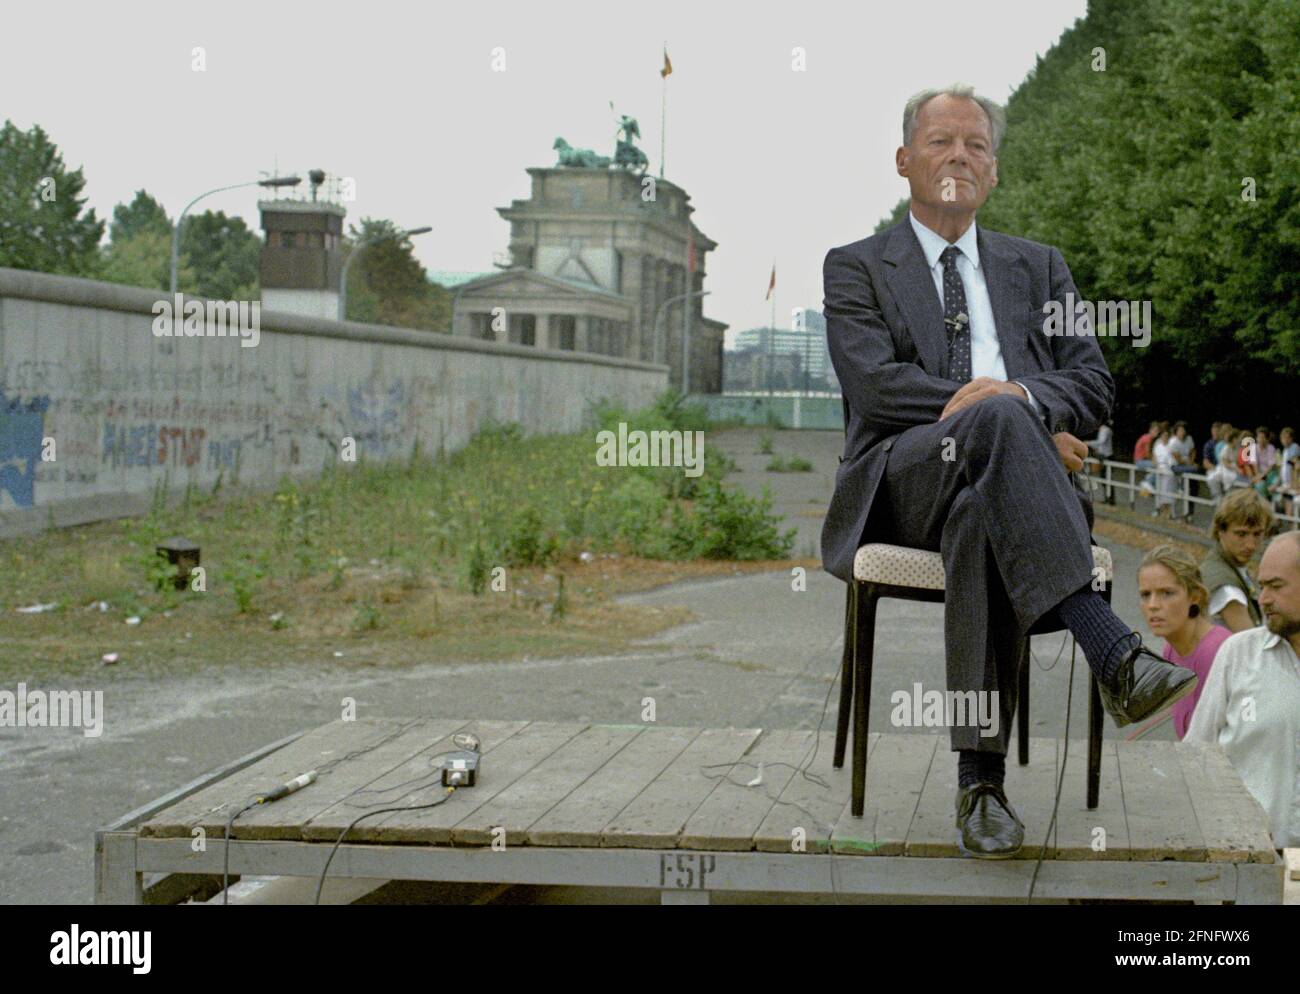 Berlin selection / Brandenburg Gate / 1986 Willy Brandt at the Wall. In the Reichstag there is an event for the 25th anniversary of the Wall. Brandt comes out for an interview with American TV. The TV people put him in front of the Brandenburg Gate and the Wall. // History / Communism / Berlin districts / Symbols / GDR Wall / [automated translation] Stock Photo